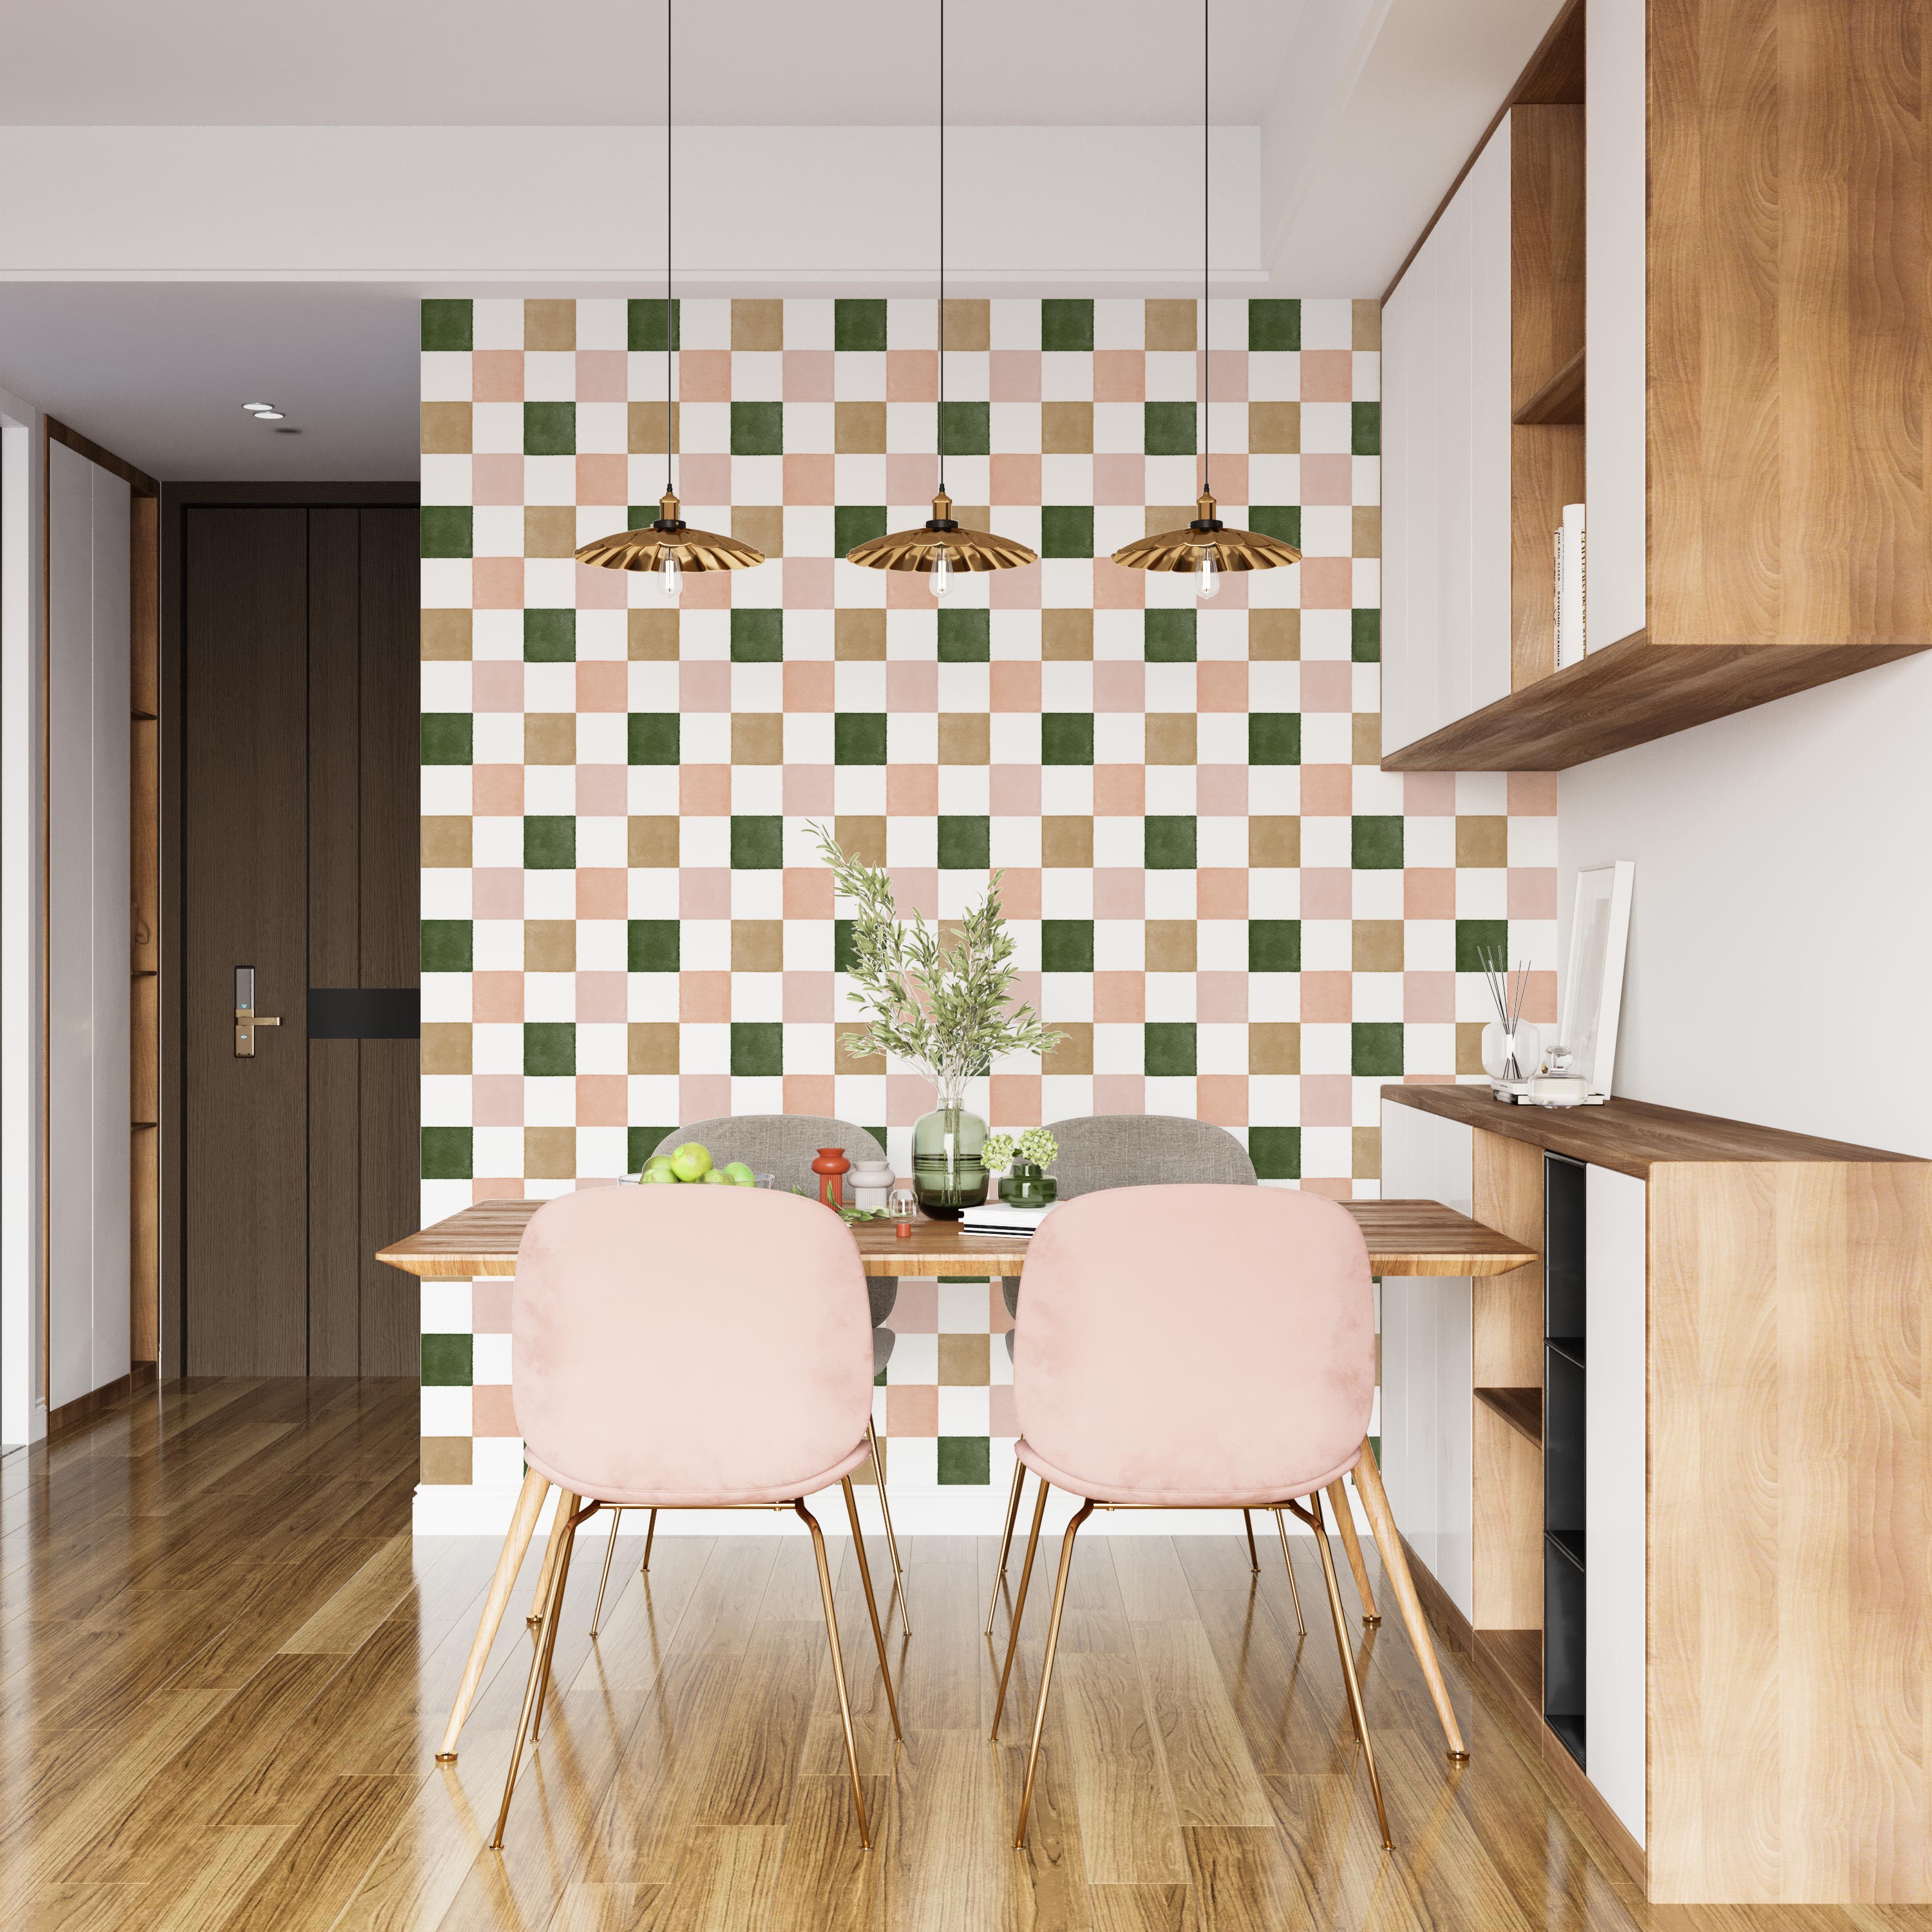 files/A-vibrant-modern-kitchen-comes-to-life-with-the-retro-checkered-watercolor-peel-and-stick-wallpaper.-The-pink-chairs-perfectly-complement-the-wallpaper_s-pink-checks_-creating-a-livel.jpg